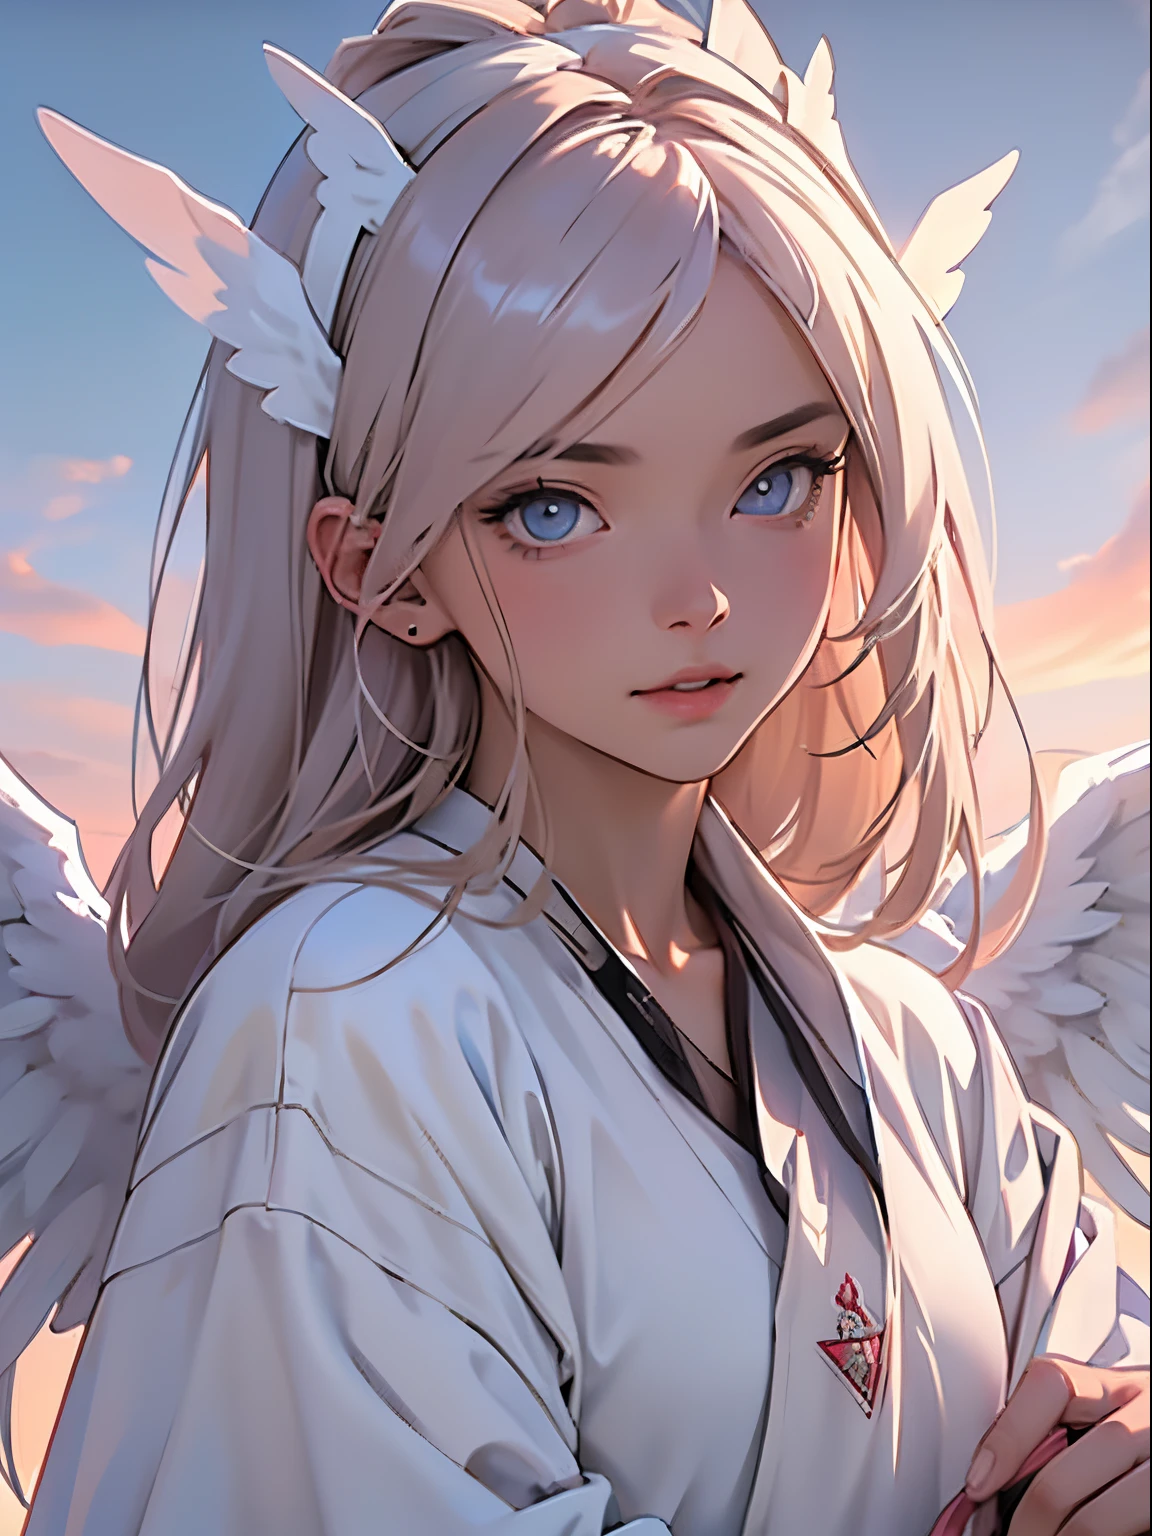 ((RAW photos)), ((tmasterpiece)), Anthropomorphic humanoid angel girl wearing white noble robe, Complicated details, soccer ball, Gribos&#39; complex work, The sky behind, Pink, Beautiful wings, Detailed eyes and lips